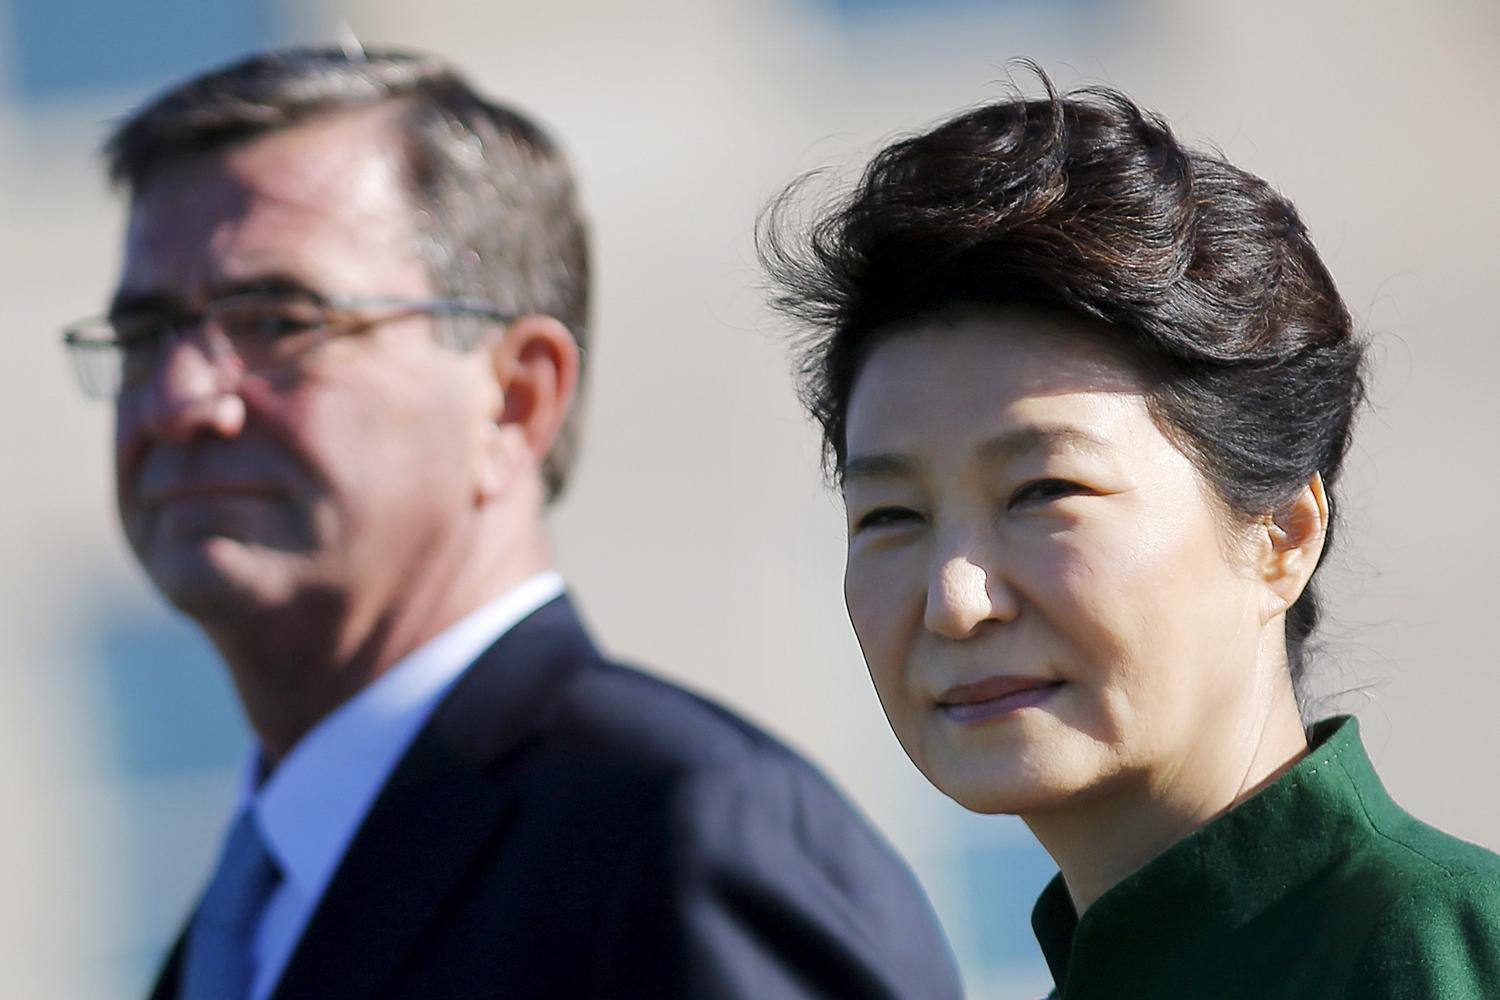 South Korea's President Park Geun-hye and U.S. Secretary of Defense Ash Carter attend a military honors arrival ceremony at the Pentagon in Washington October 15, 2015. REUTERS/Carlos Barria - RTS4M9O